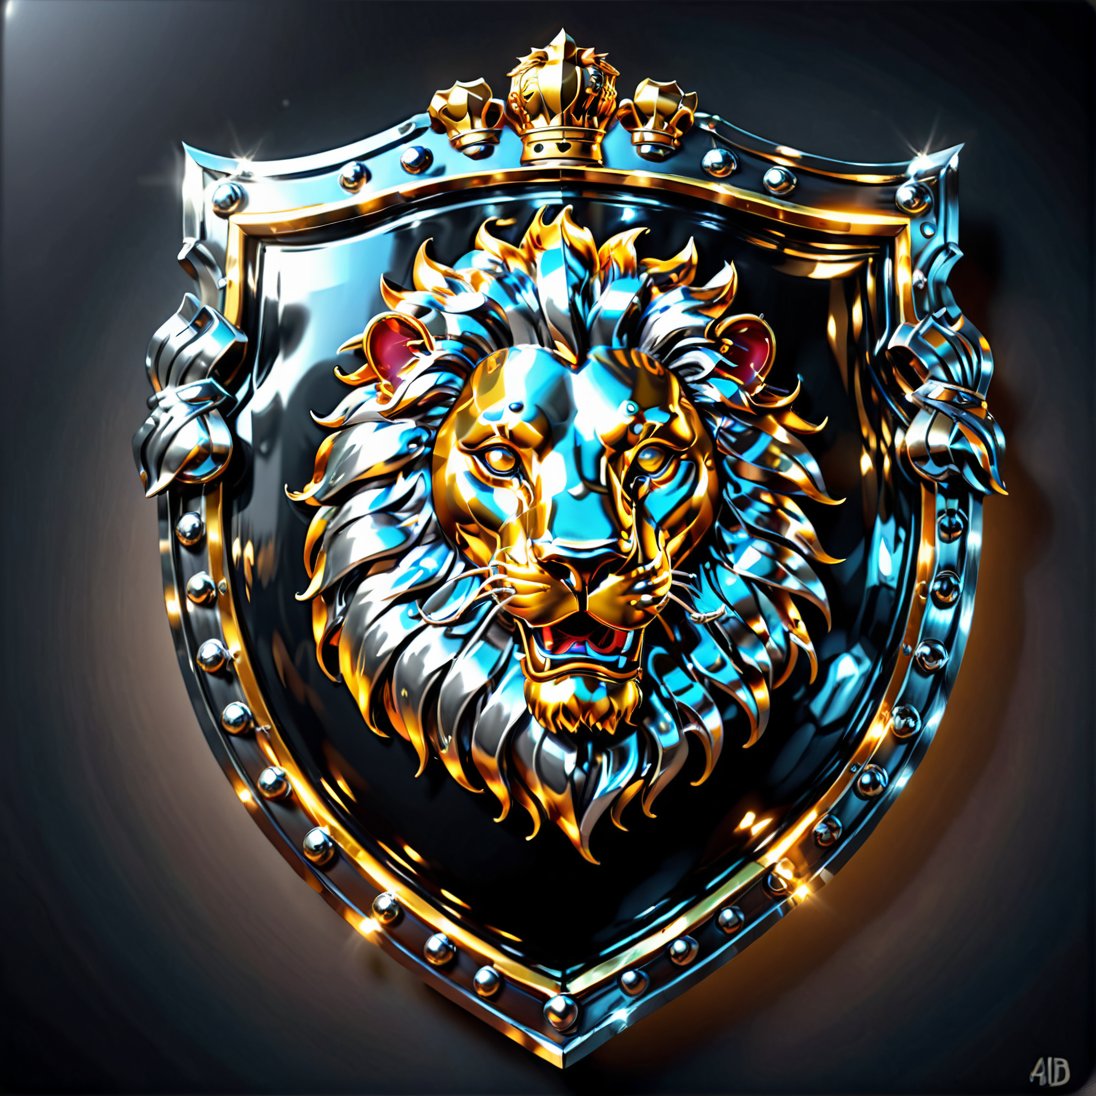 high detail, high quality, 8K Ultra HD, high quality, 8K Ultra HD, ln Family crest style, A neon mad golden lion face on a shield in silver and black highlights, background Black, glass shiny style